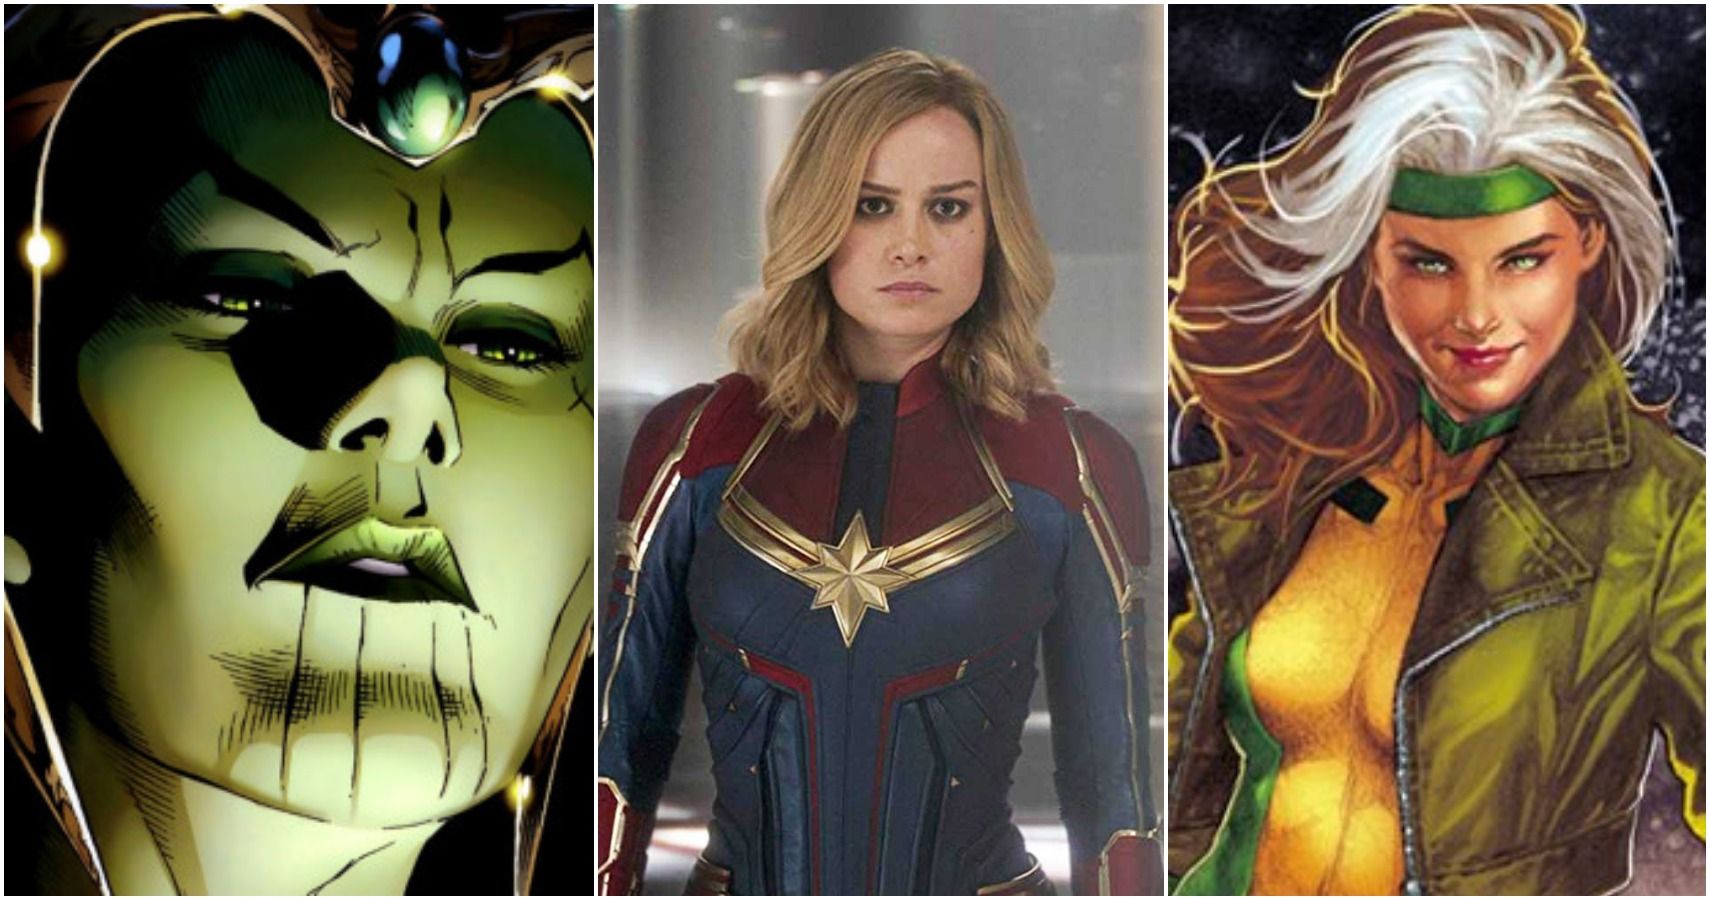 Captain Marvel beside two of her villains, Veranke (lef) and Rogue (right).